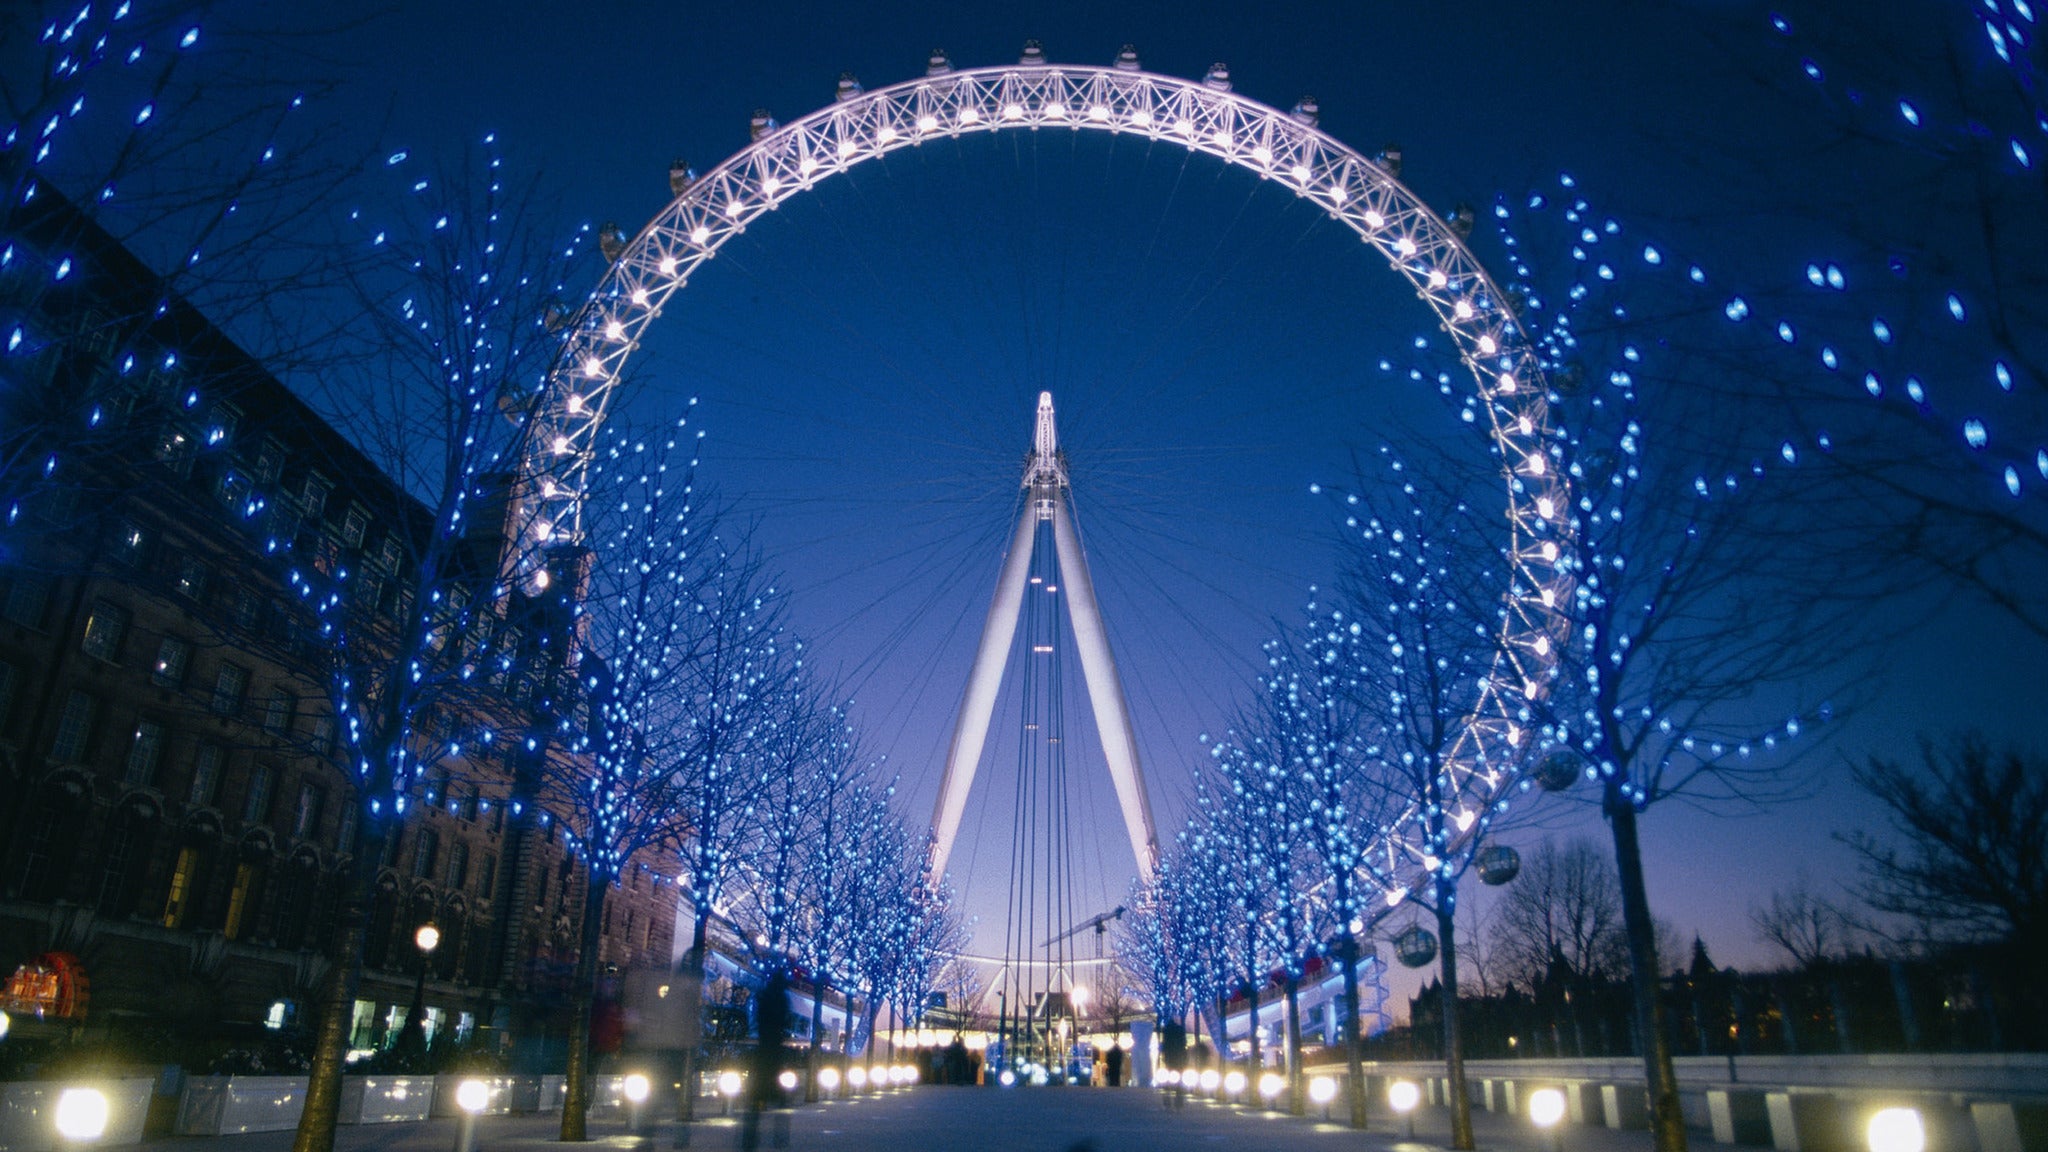 Lastminute.com London Eye - Standard Entry and Package Tickets